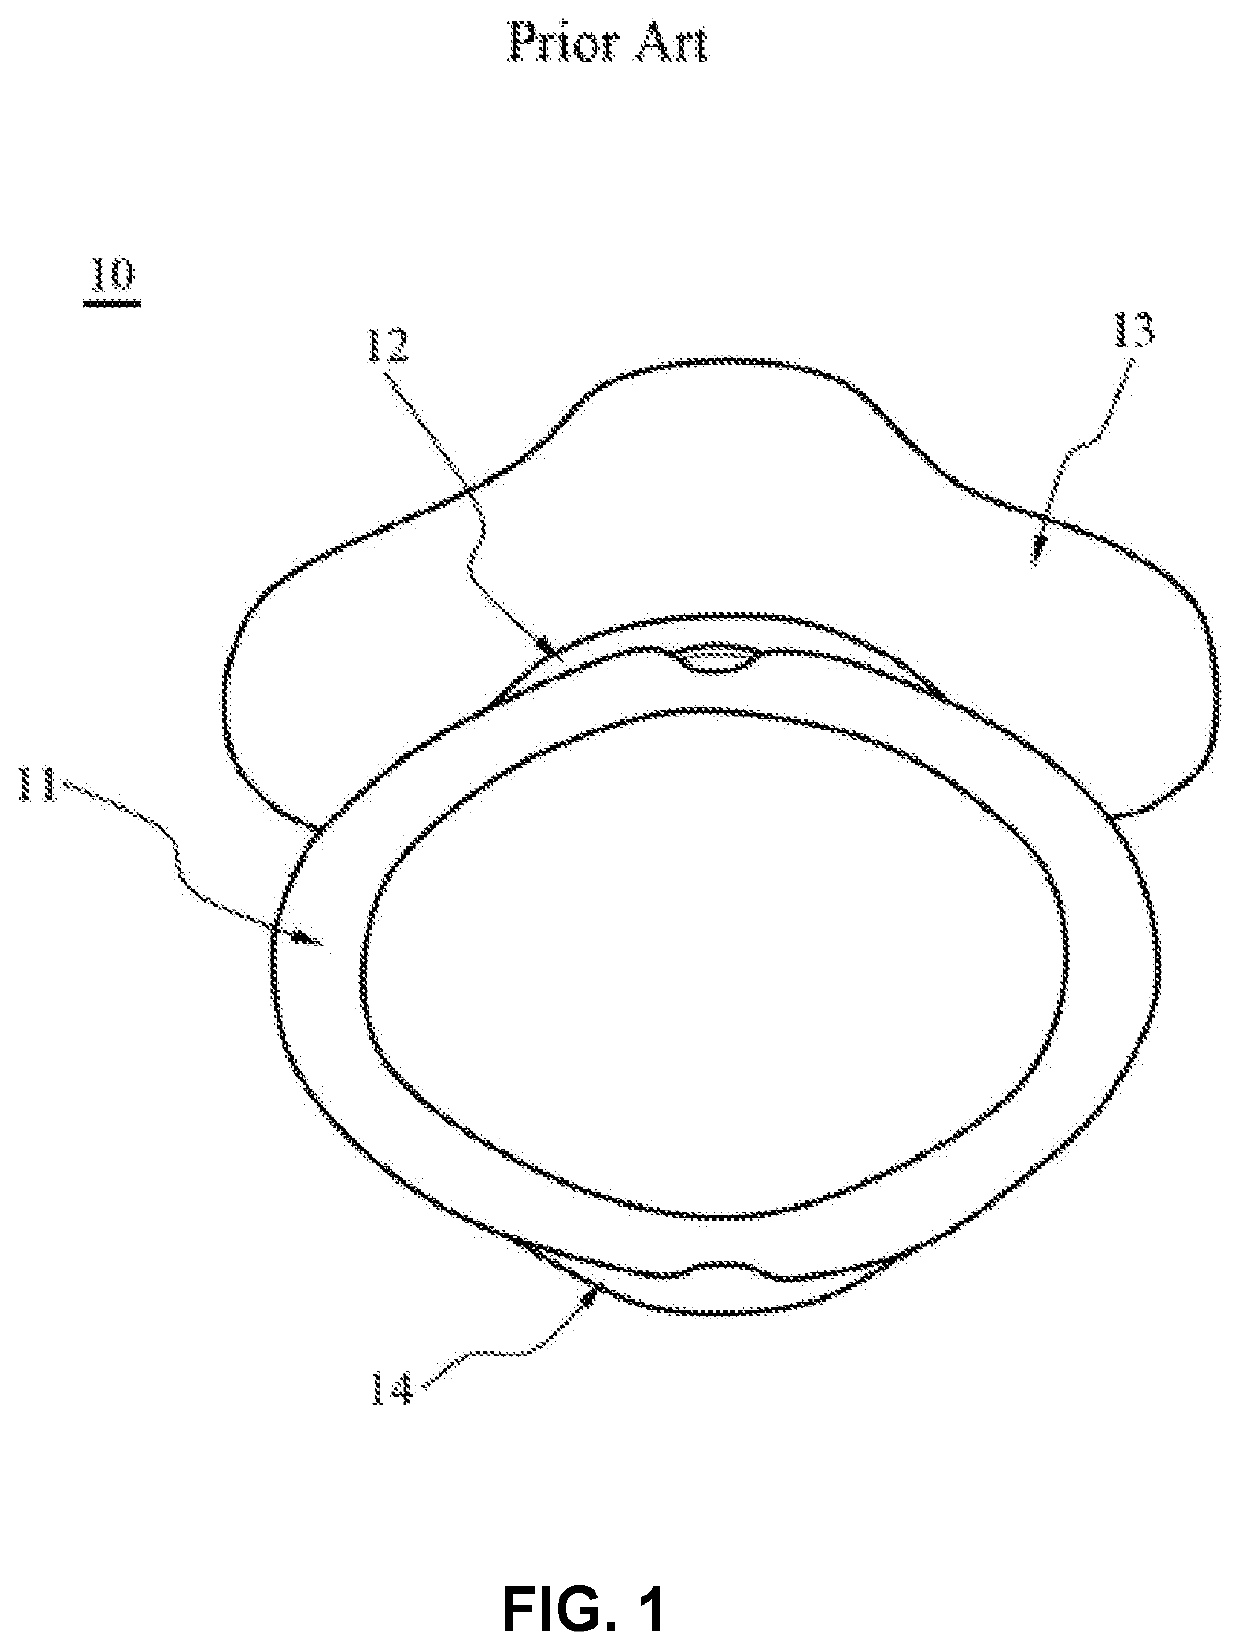 Mouth Gag And Method For Using The Same